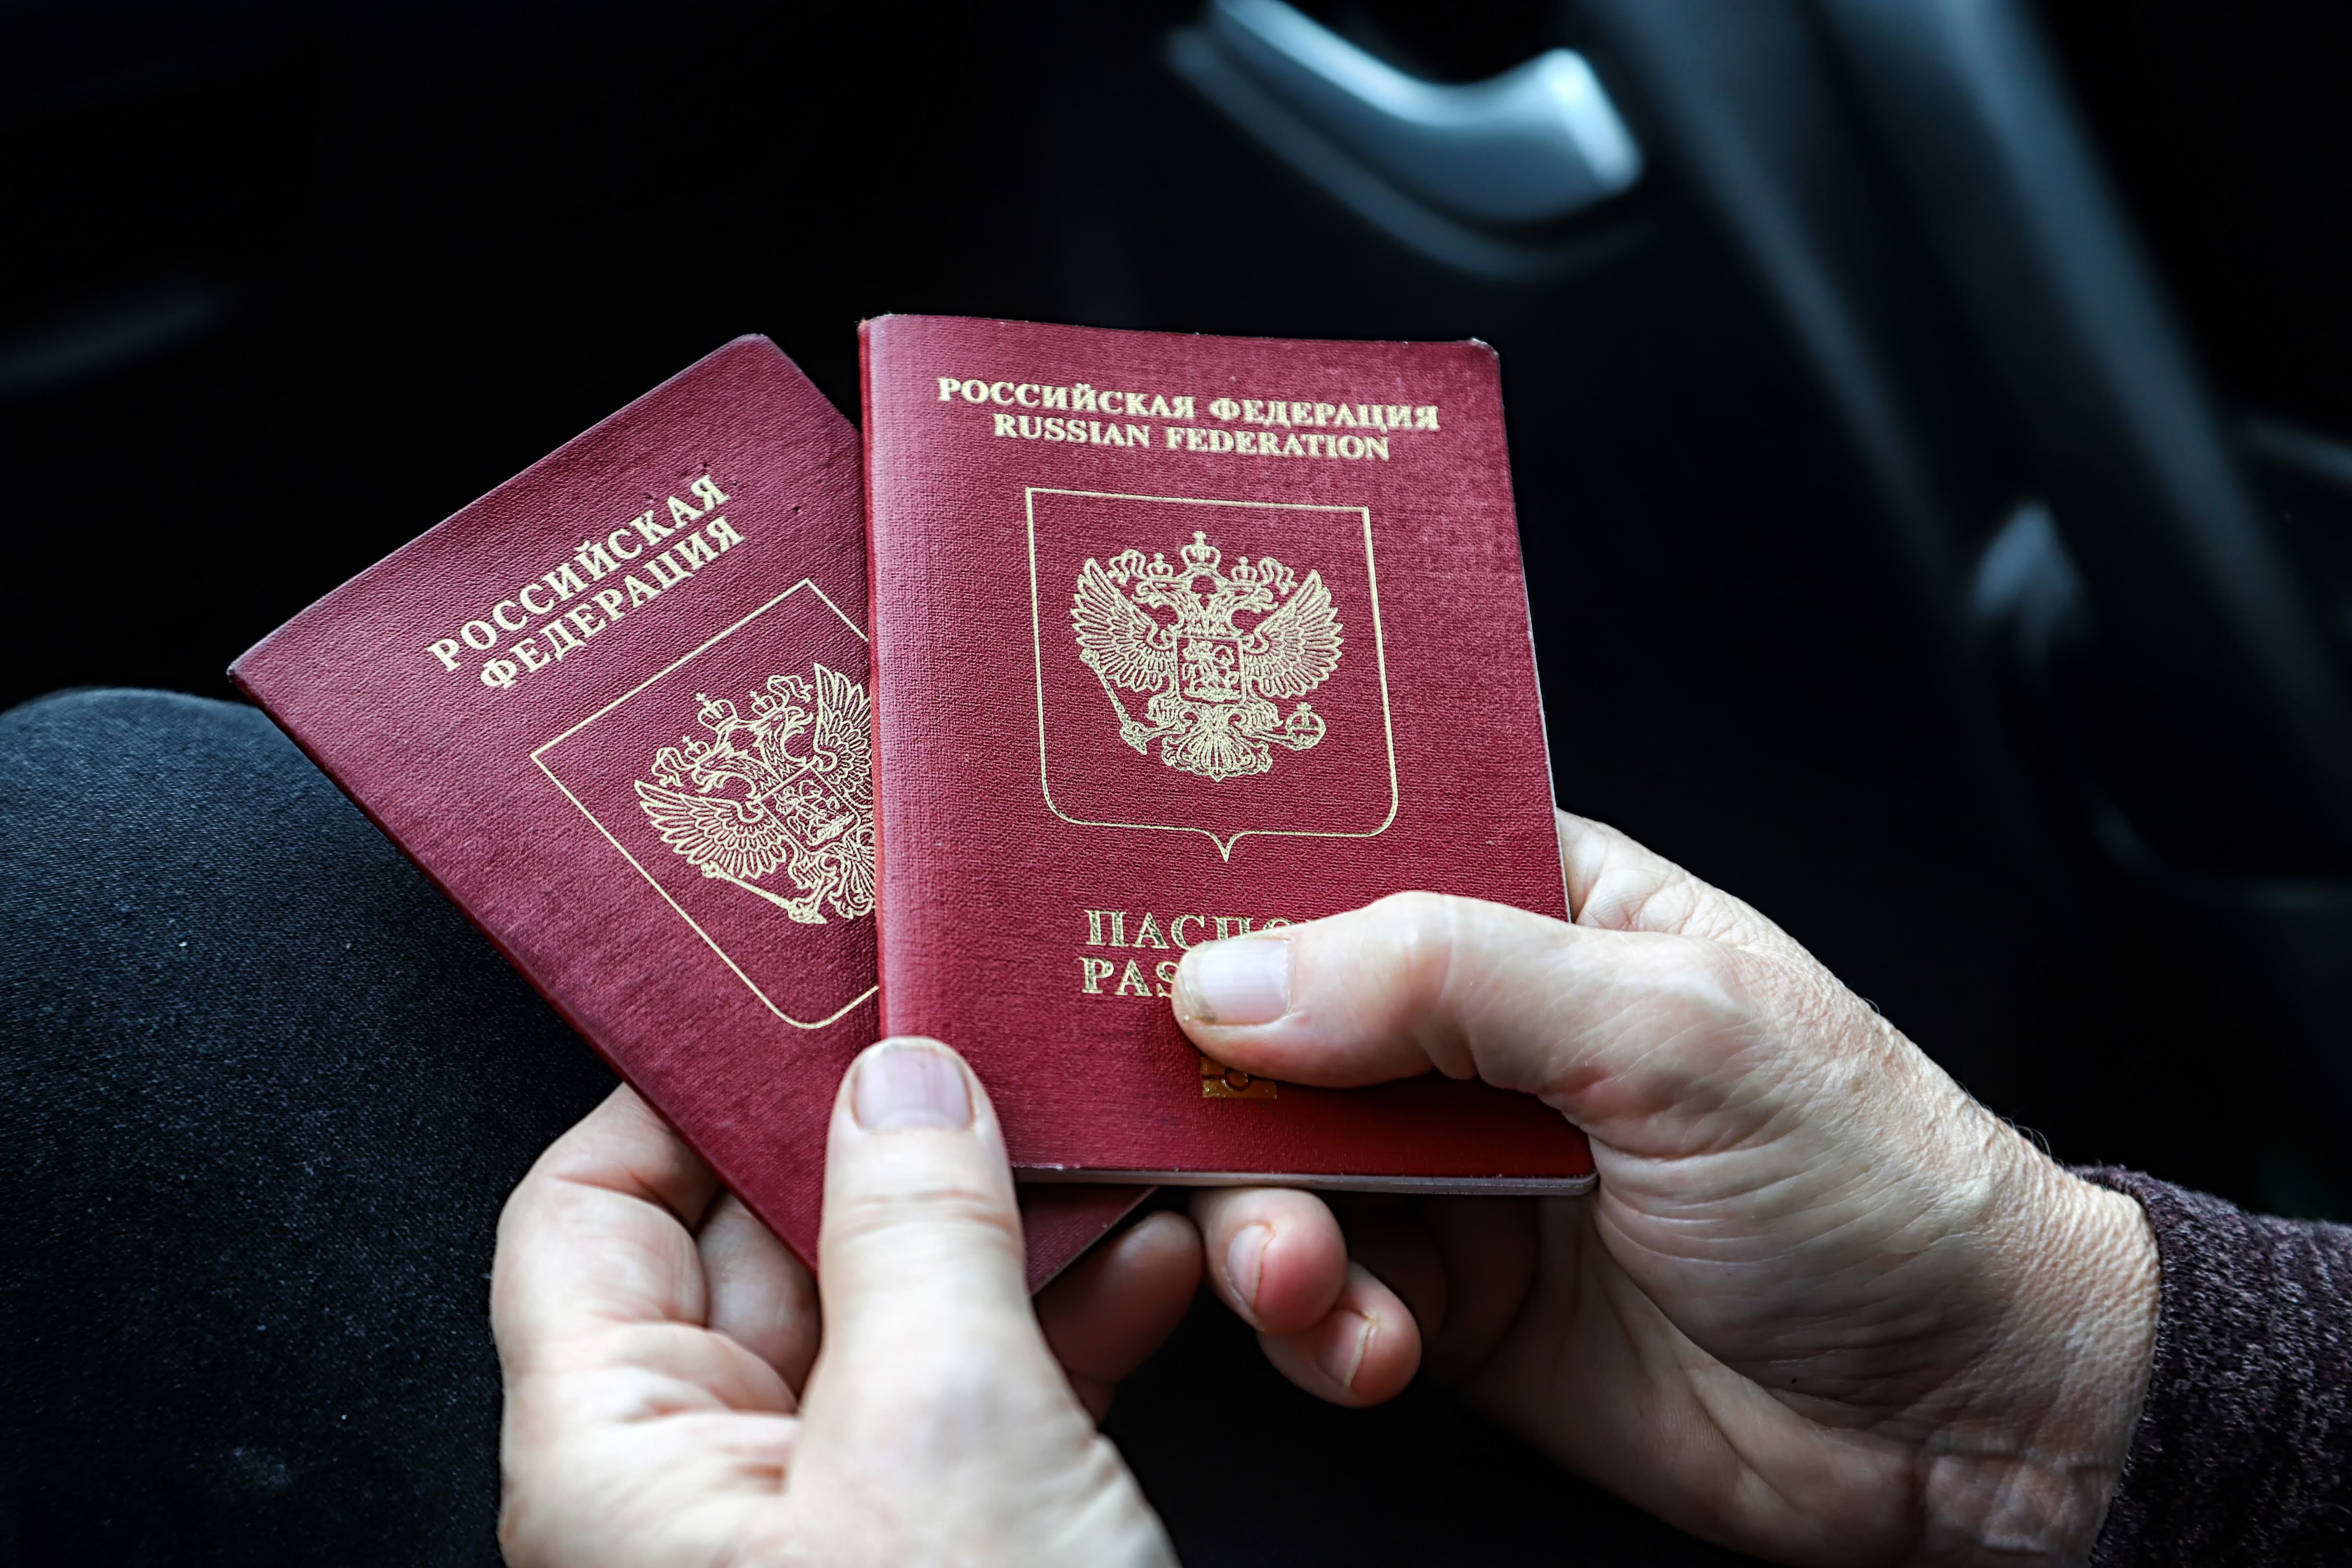 E-visas for stays of up to three months in Vietnam are now available to Russian citizens in 2023